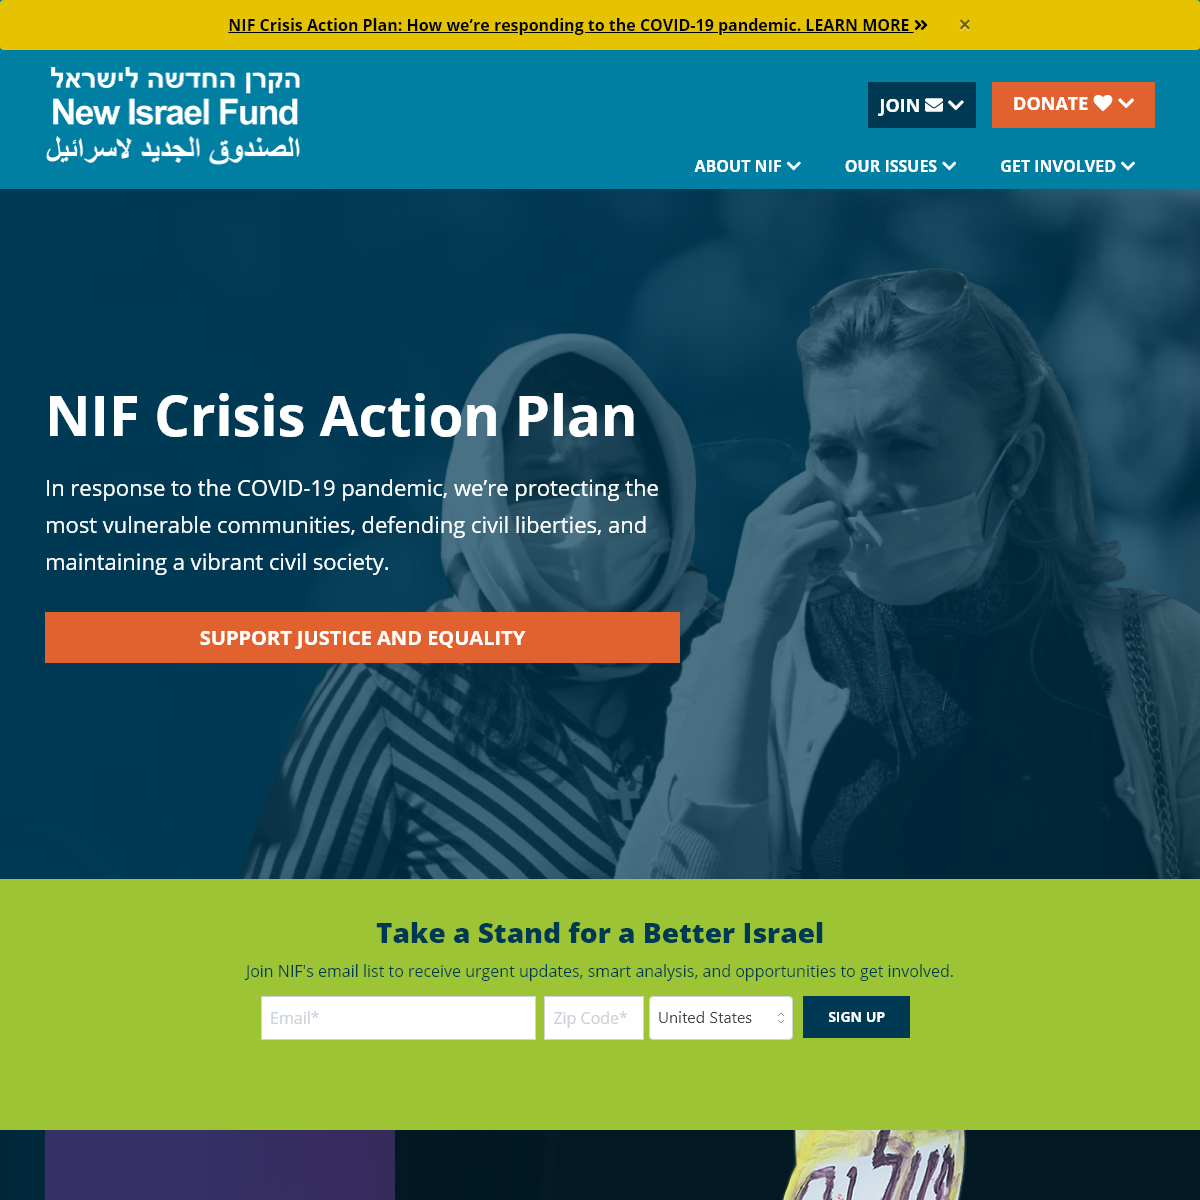 A complete backup of nif.org